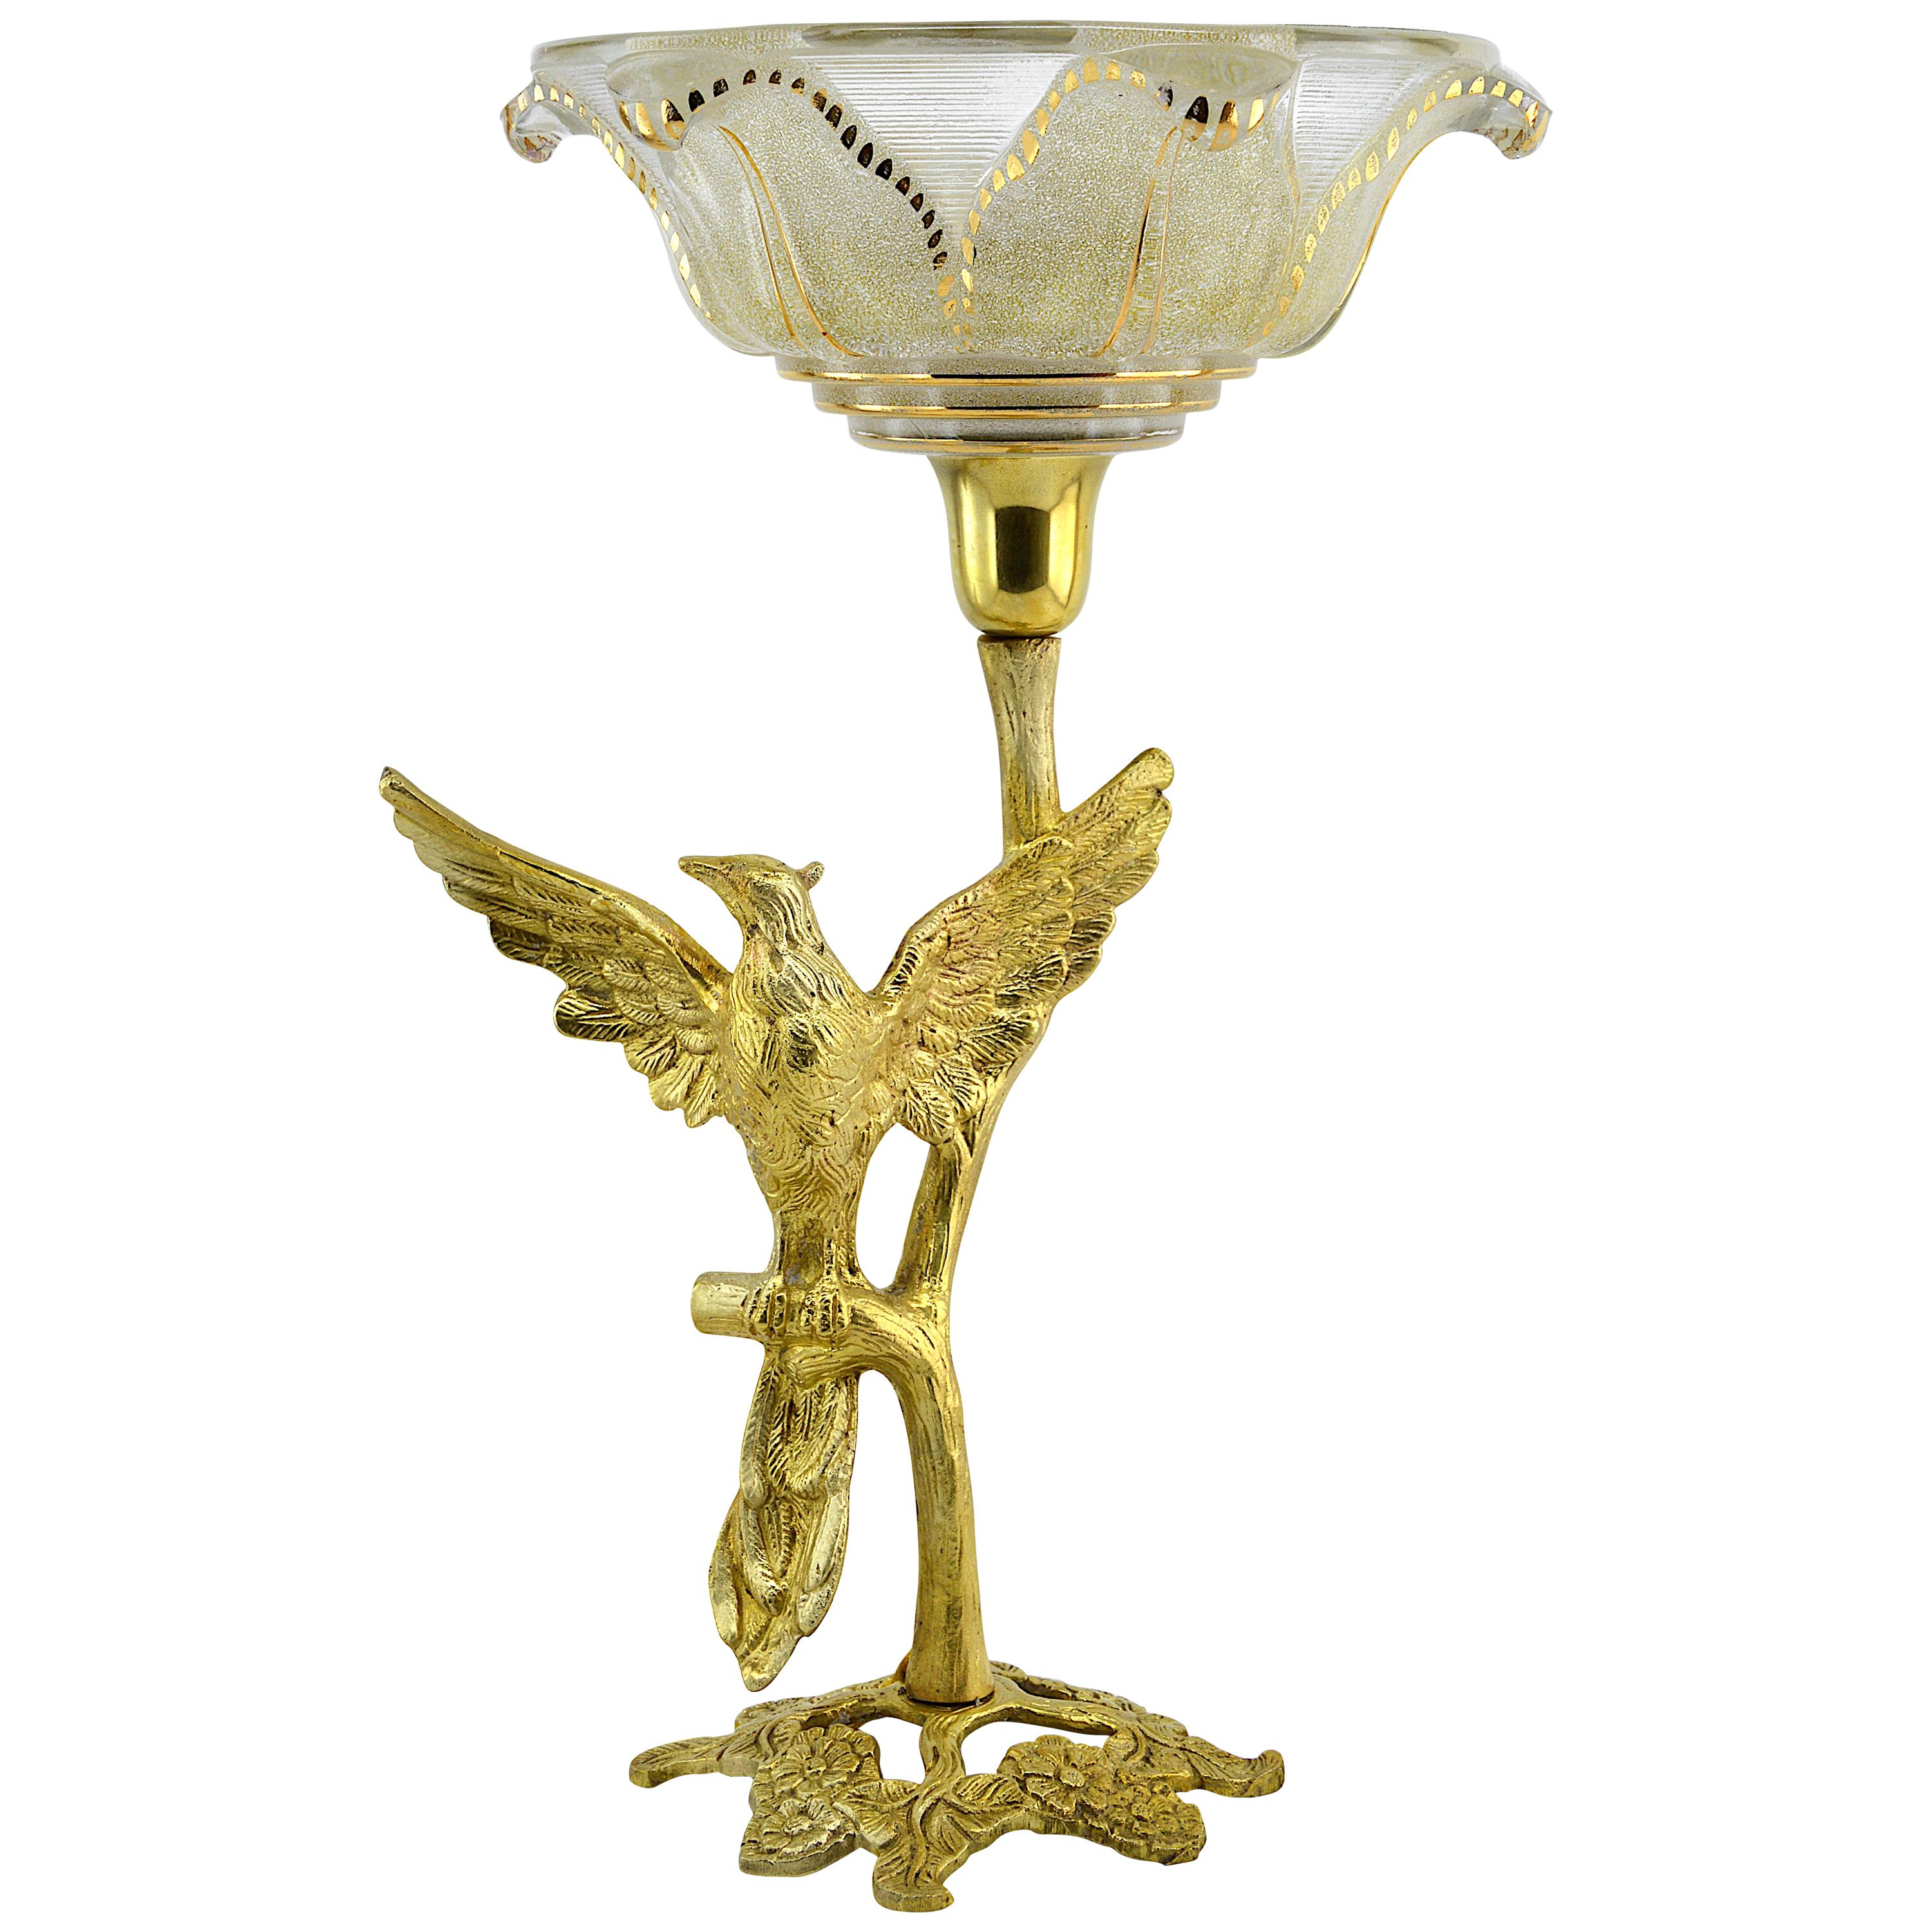 French Art Deco Bird Table Lamp, Late 1930s